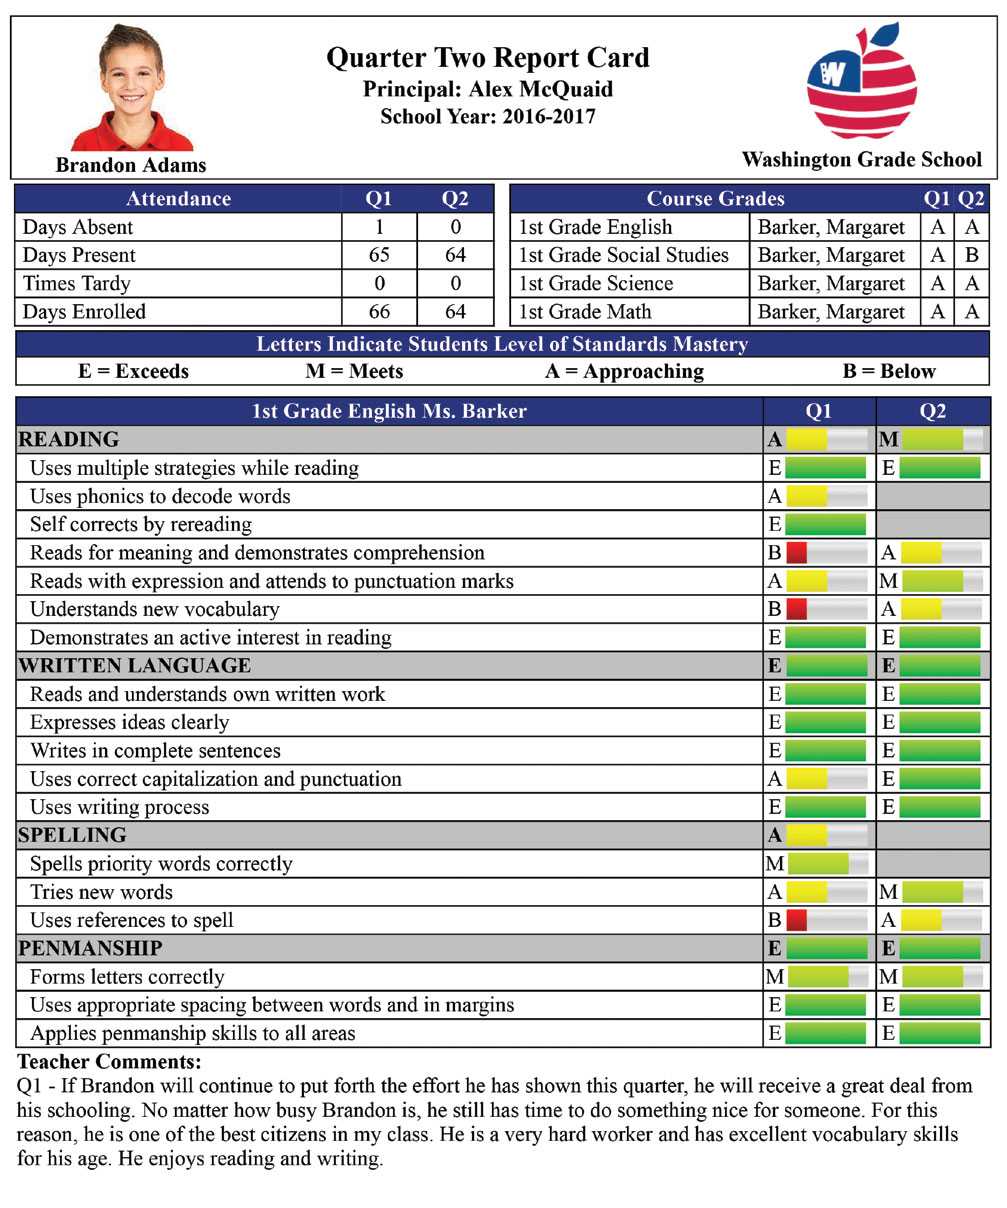 Report Card Creator Plugin For Powerschool Sis - From Mba For Powerschool Reports Templates